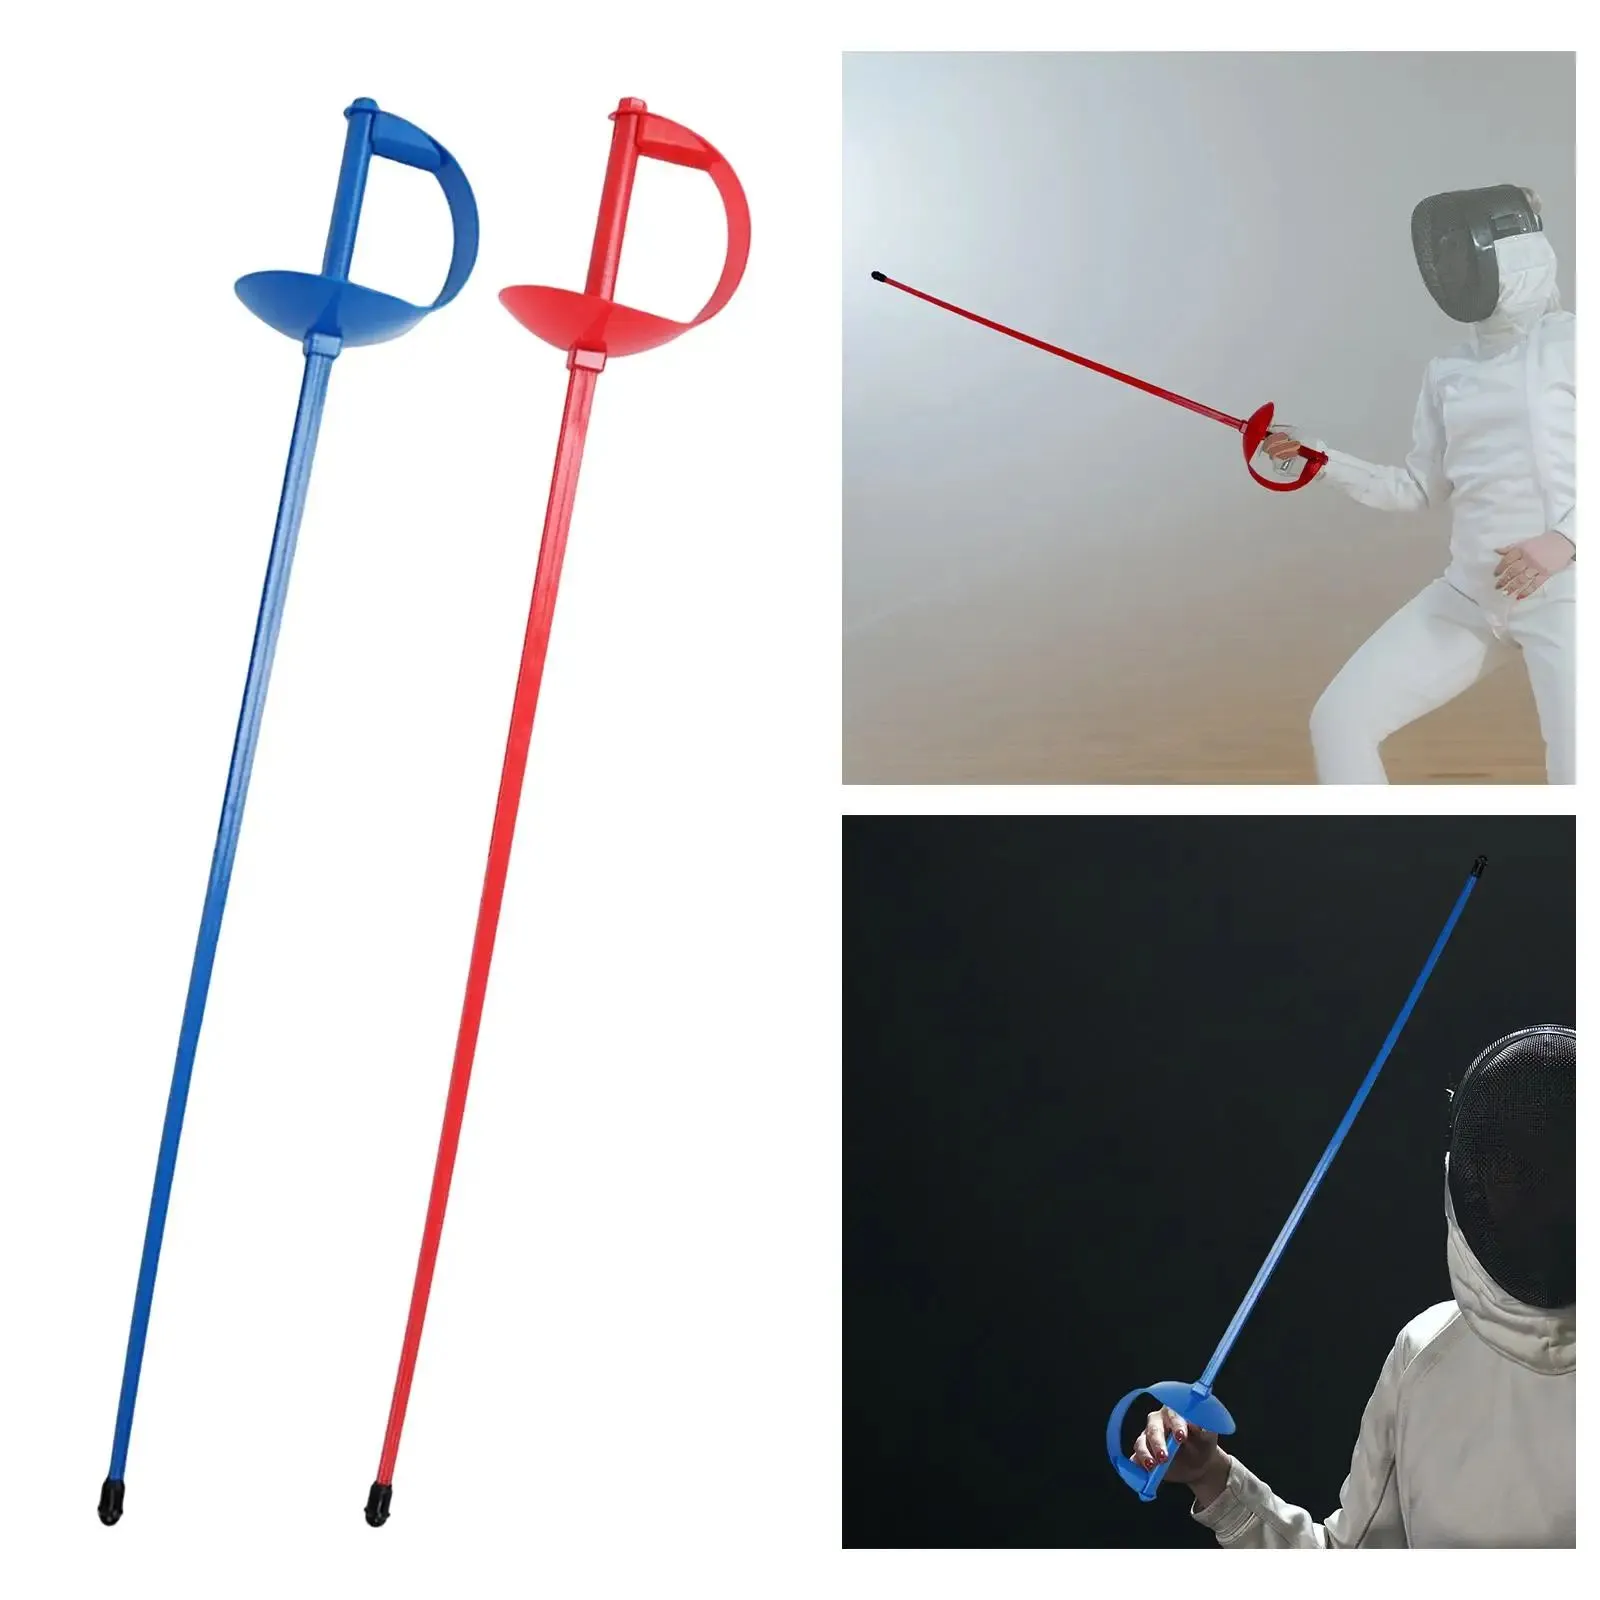 Equipment Fencing Saber Sparring Halloween Party Gift Outdoor Sports Motor Skills Plastic Induction Sword Play Training Aid Fencing